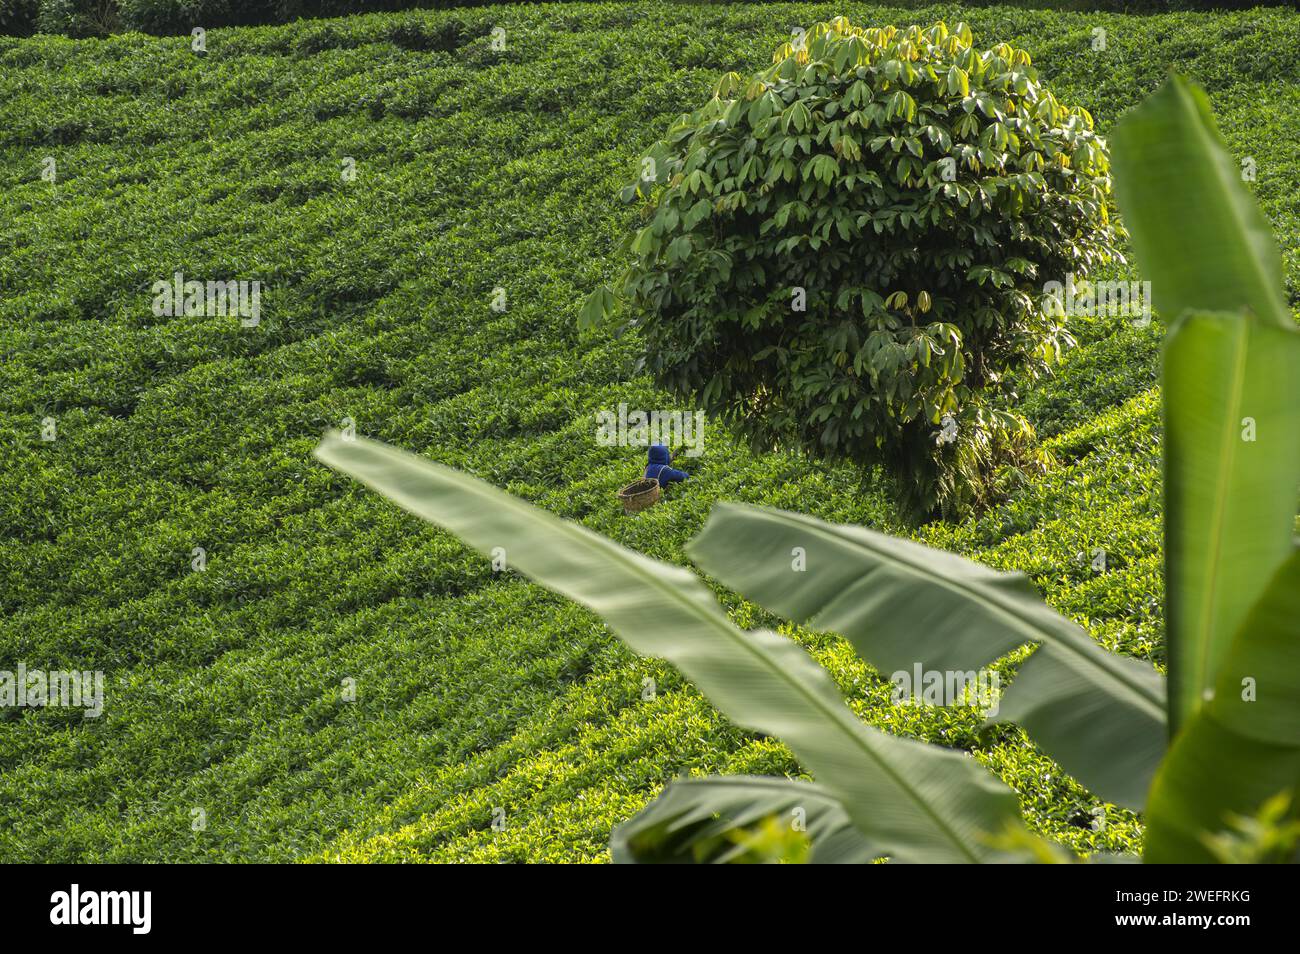 Tea plantation near Nyungwe National Park in Southwest Rwanda with vivid green leaves against a lush forest background at high altitudes Stock Photo